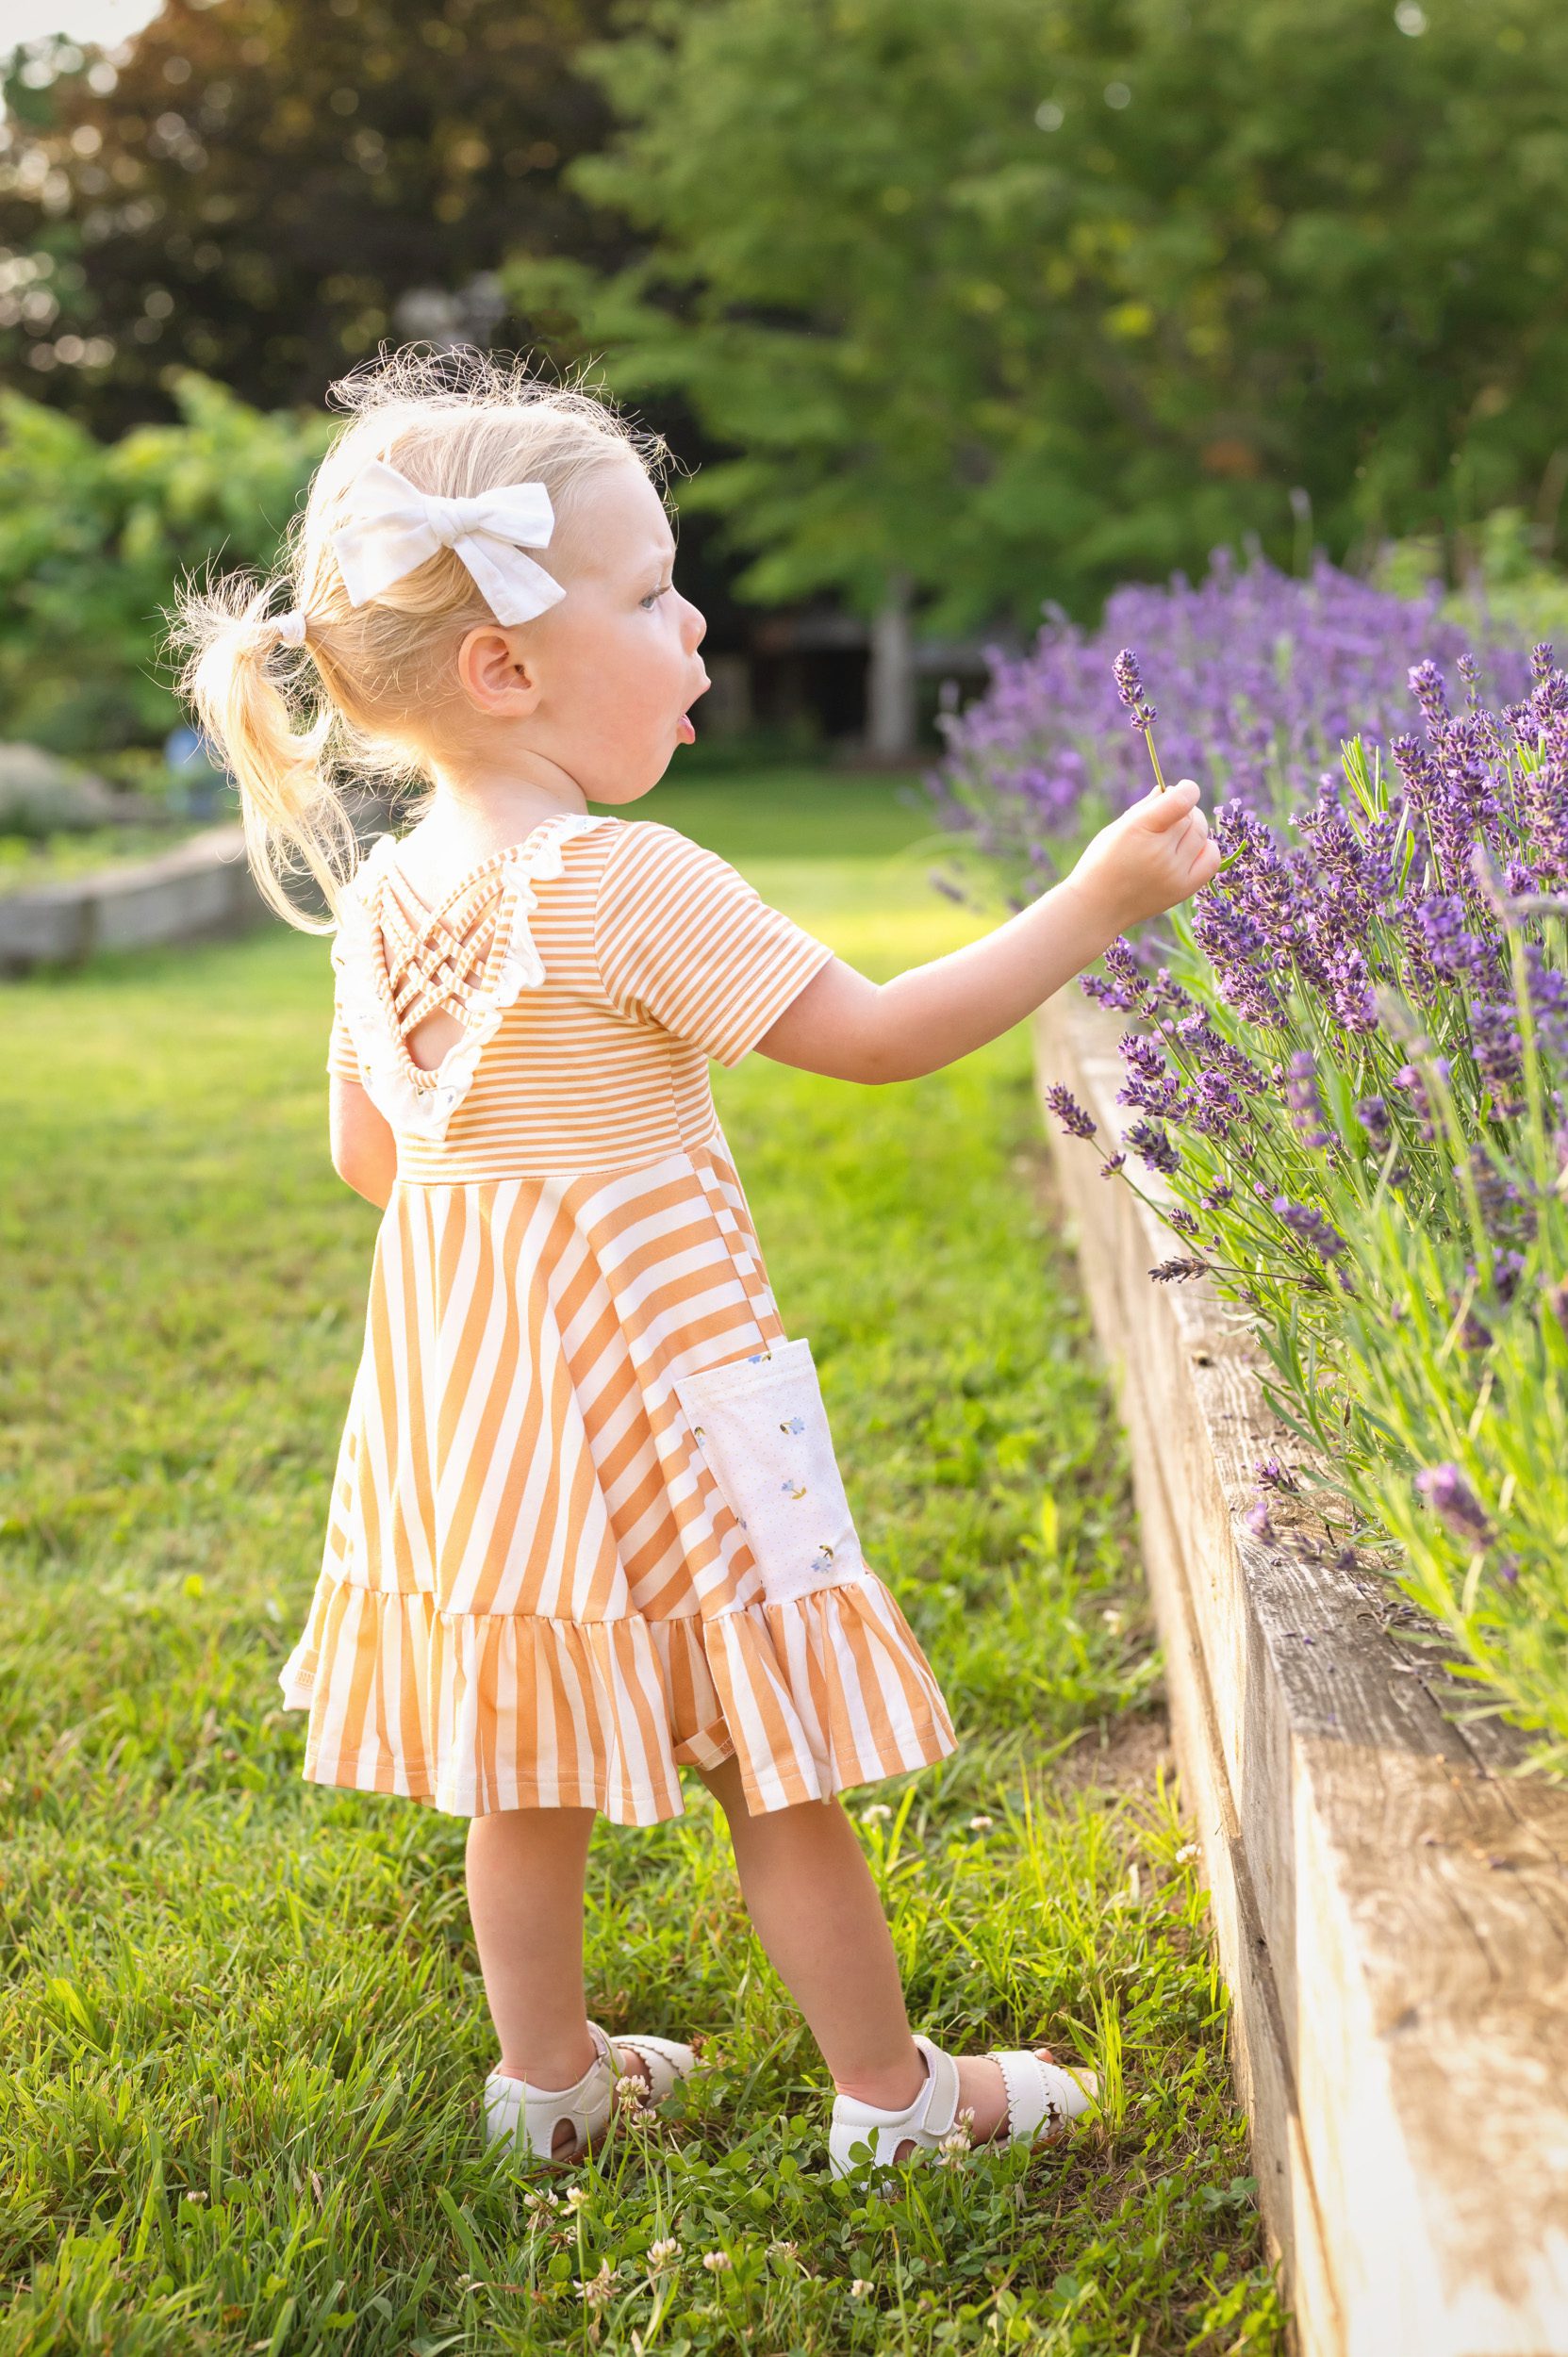 A young girl with an amazed expression reaching out to touch a lavender flower during a family photoshoot